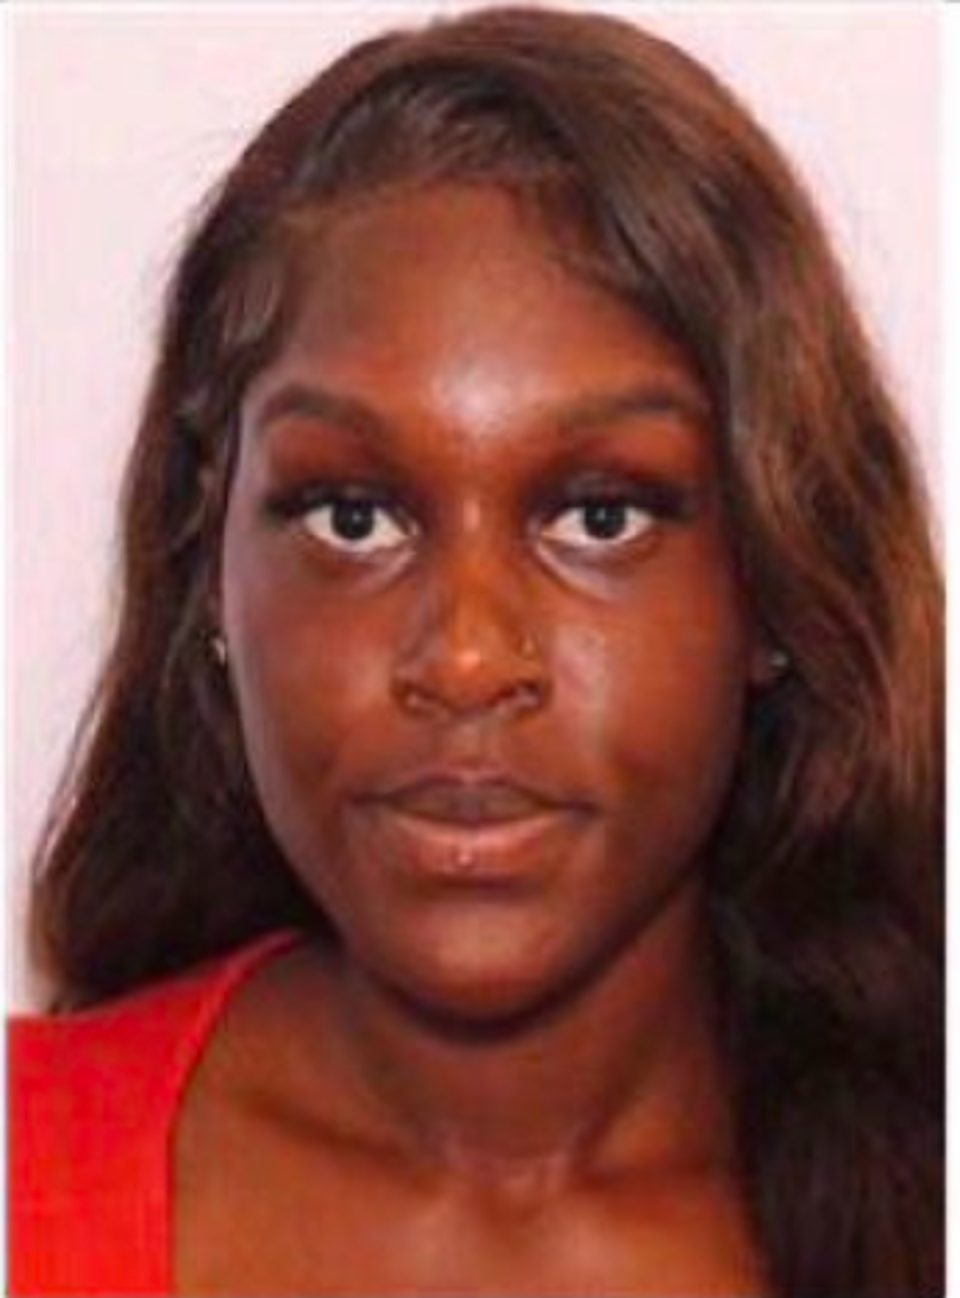 Tiffany Gray has been charged with murder and accused of murdering her ‘sugar daddy’ (DC Superior Court)